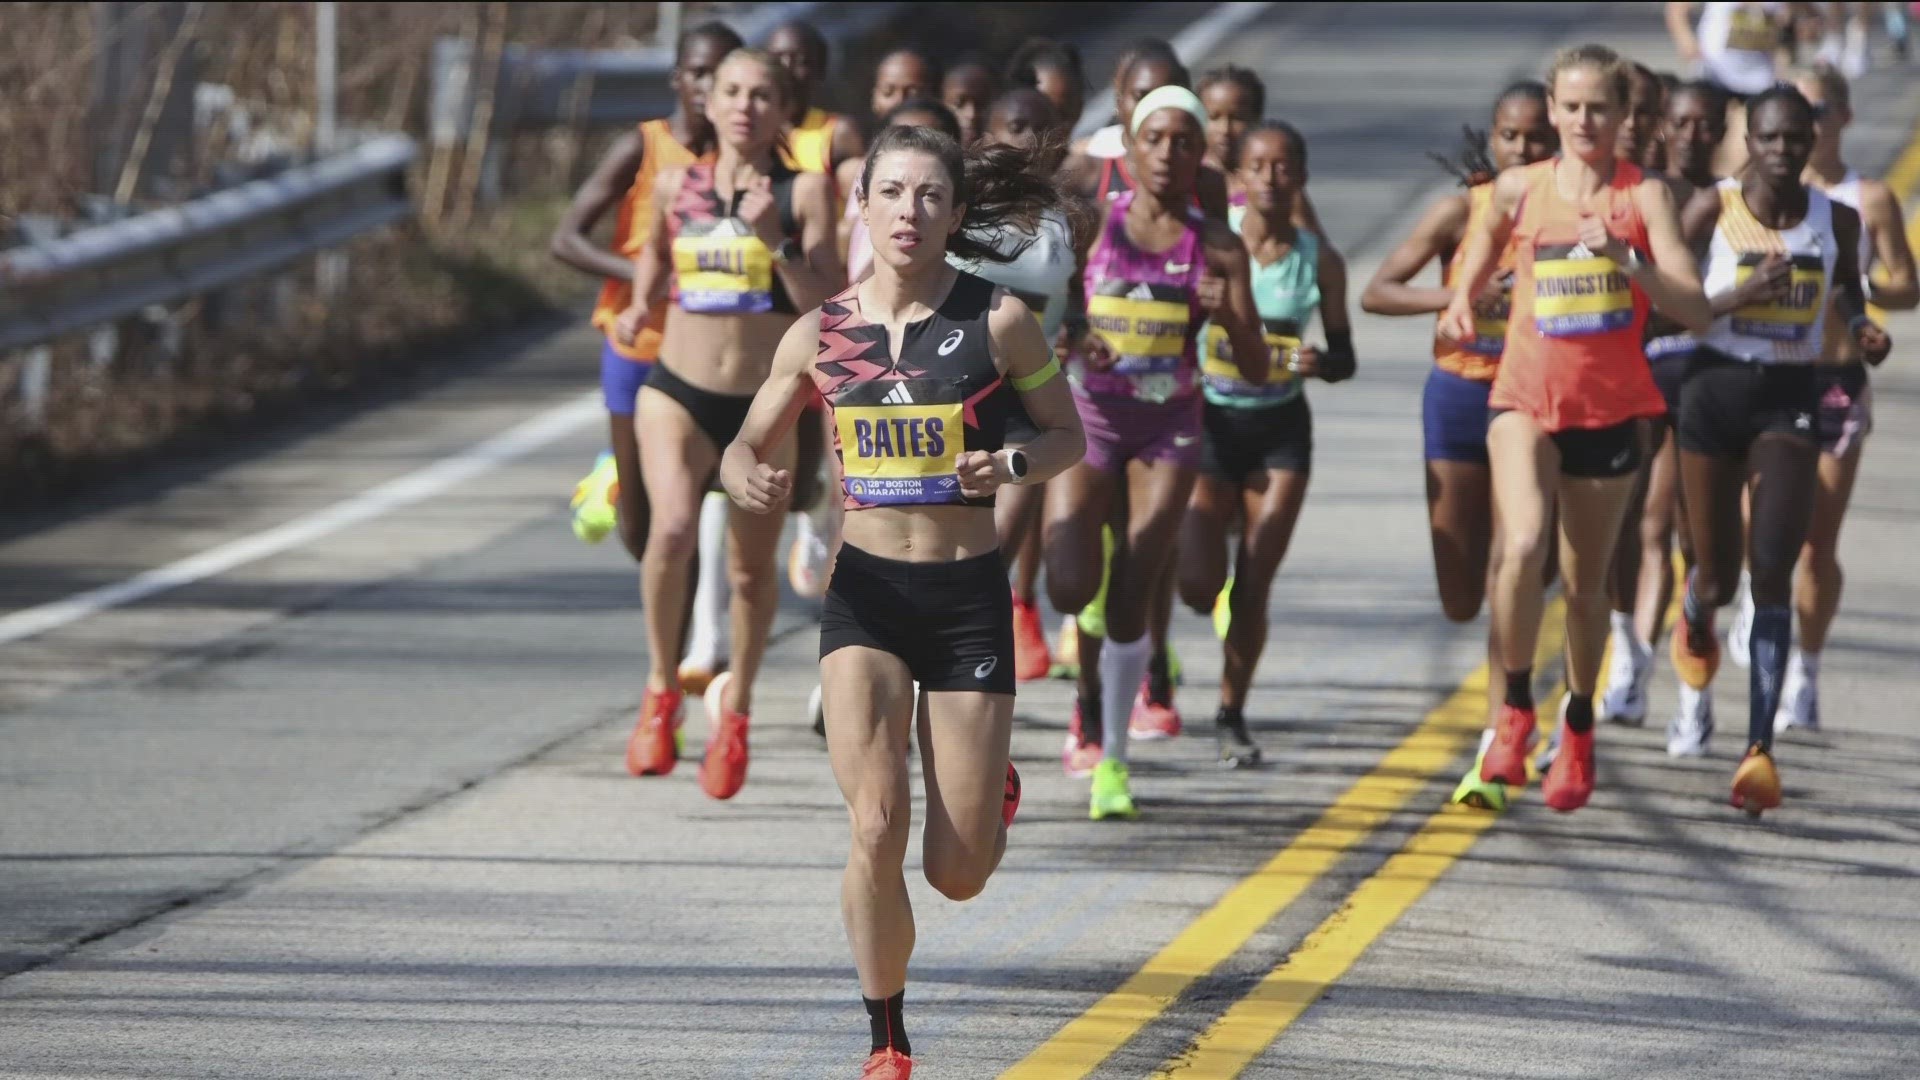 The former Boise State All-American crossed the finish line at 2:27:14, finishing 12th overall among women and first among American women.